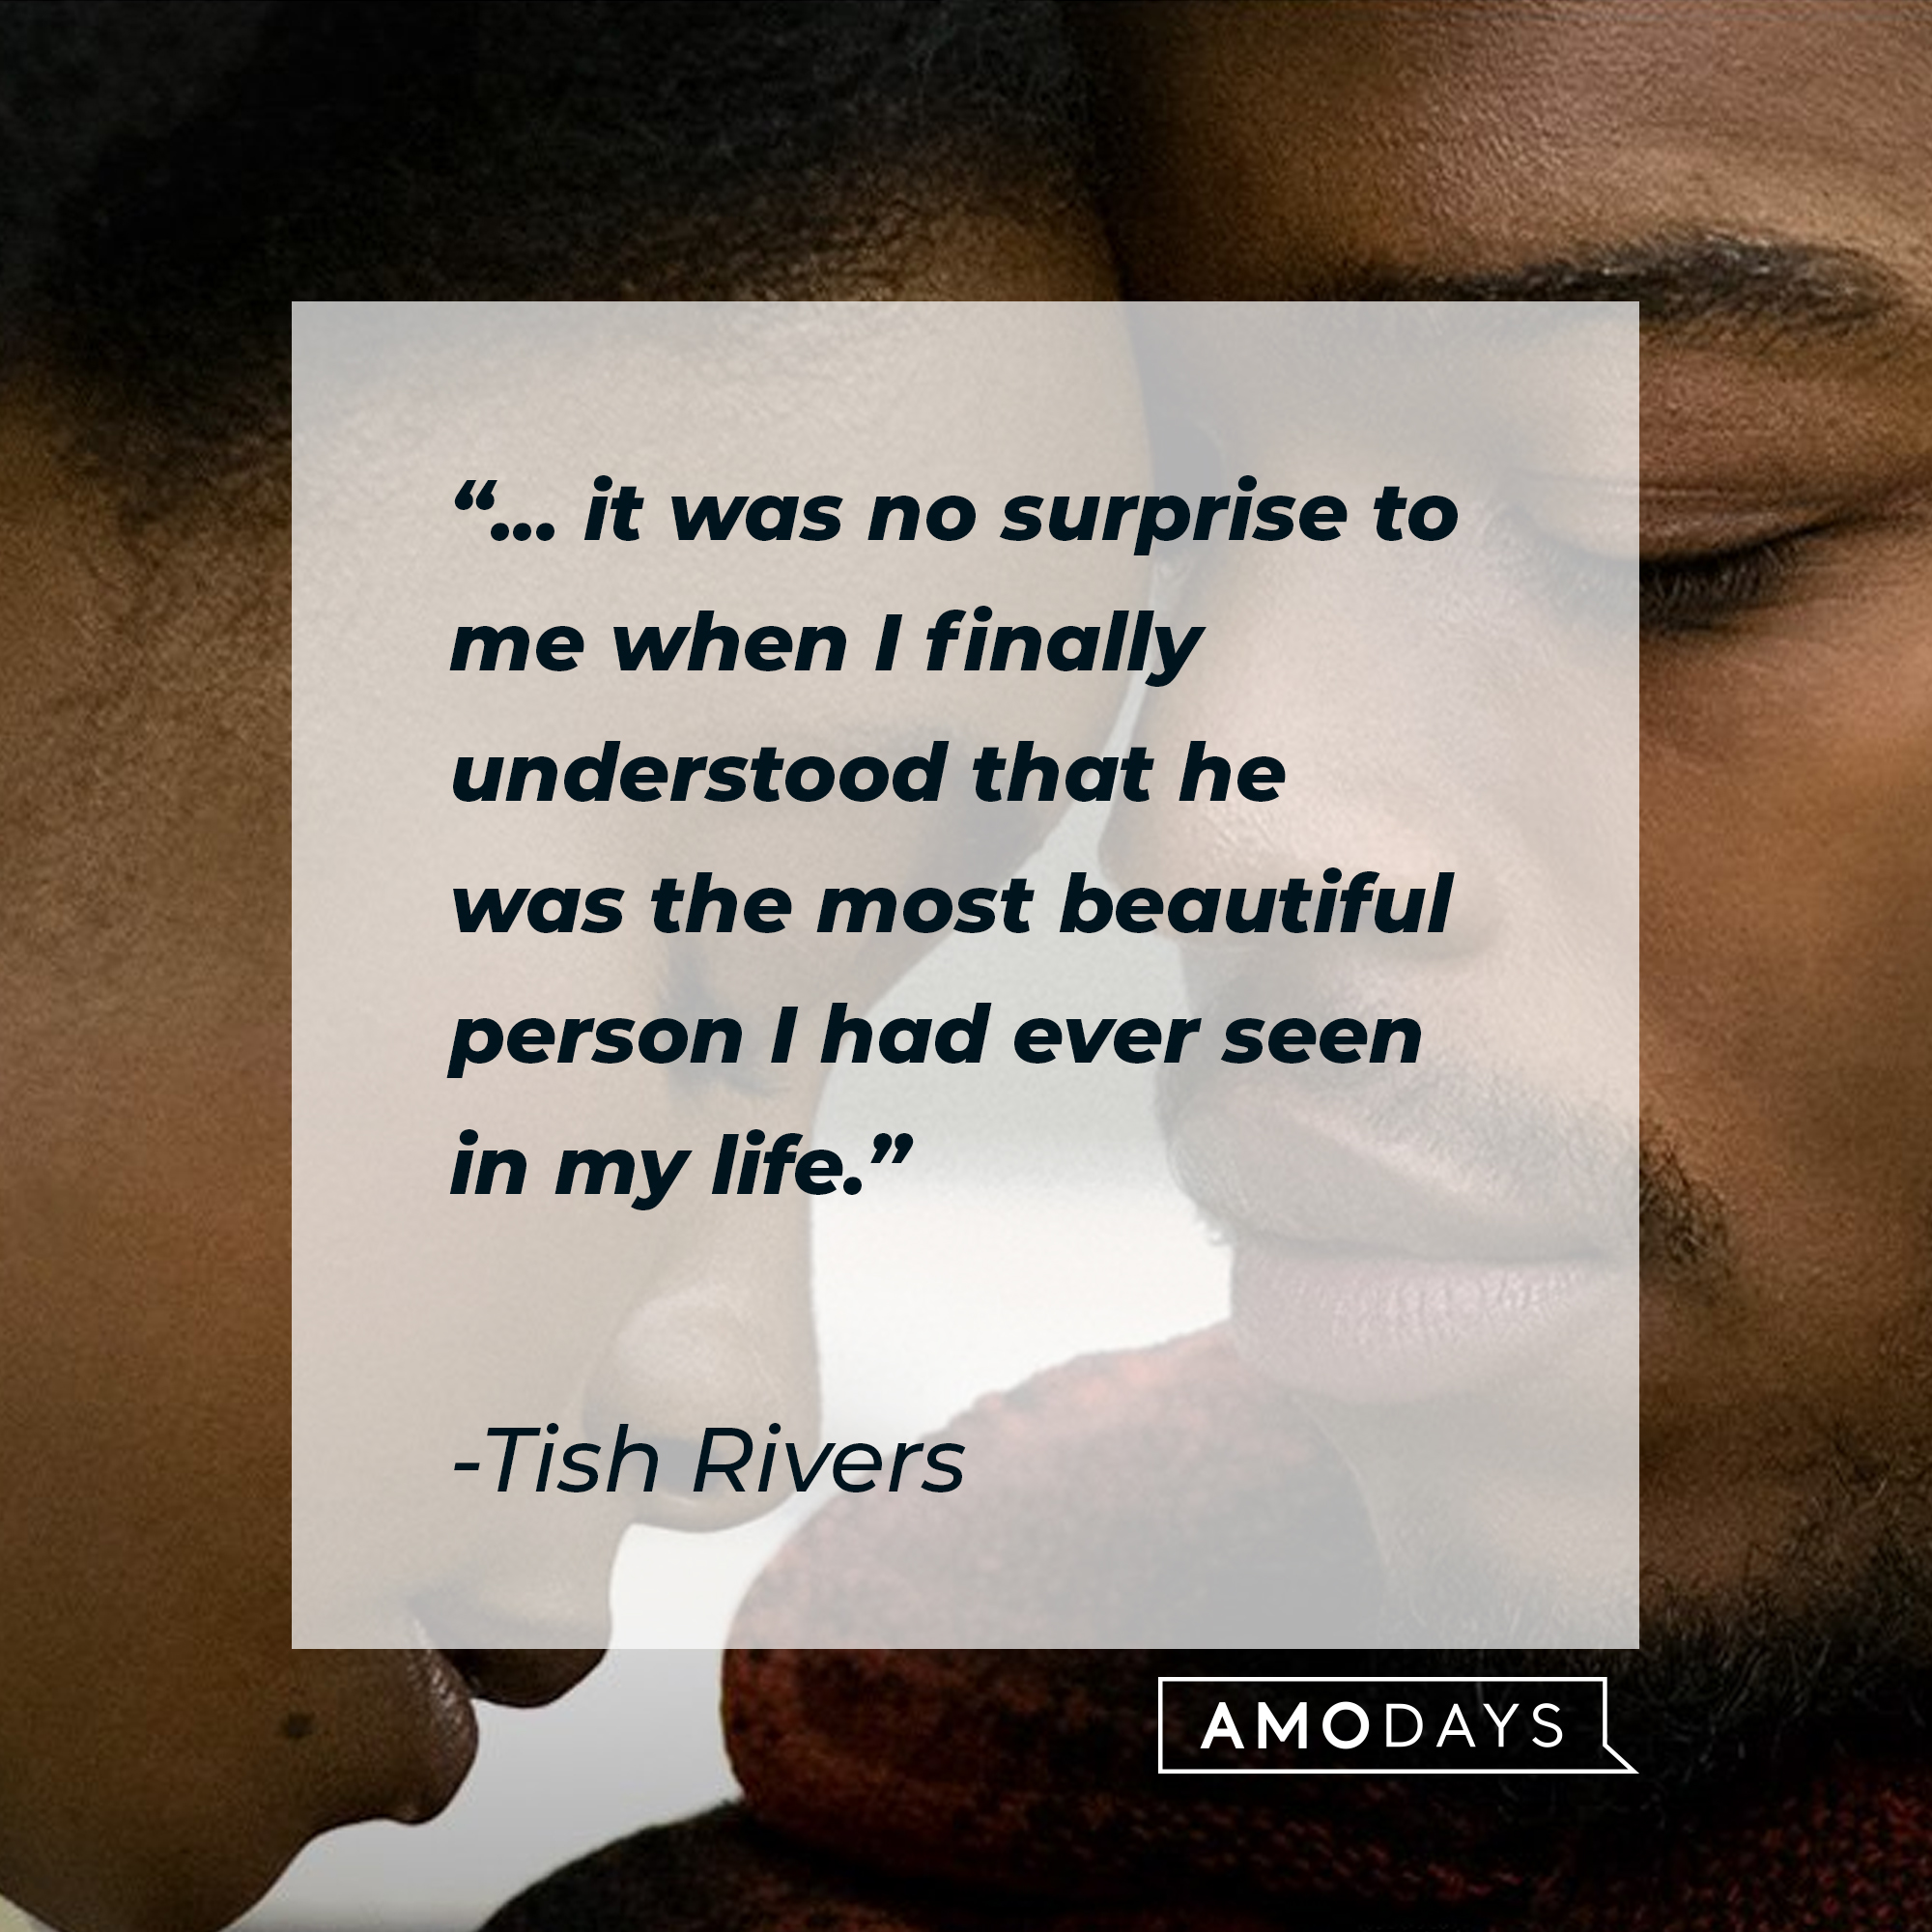 Tish Rivers' quote: "... it was no surprise to me when I finally understood that he was the most beautiful person I had ever seen in my life." | Source: facebook.com/BealeStreet